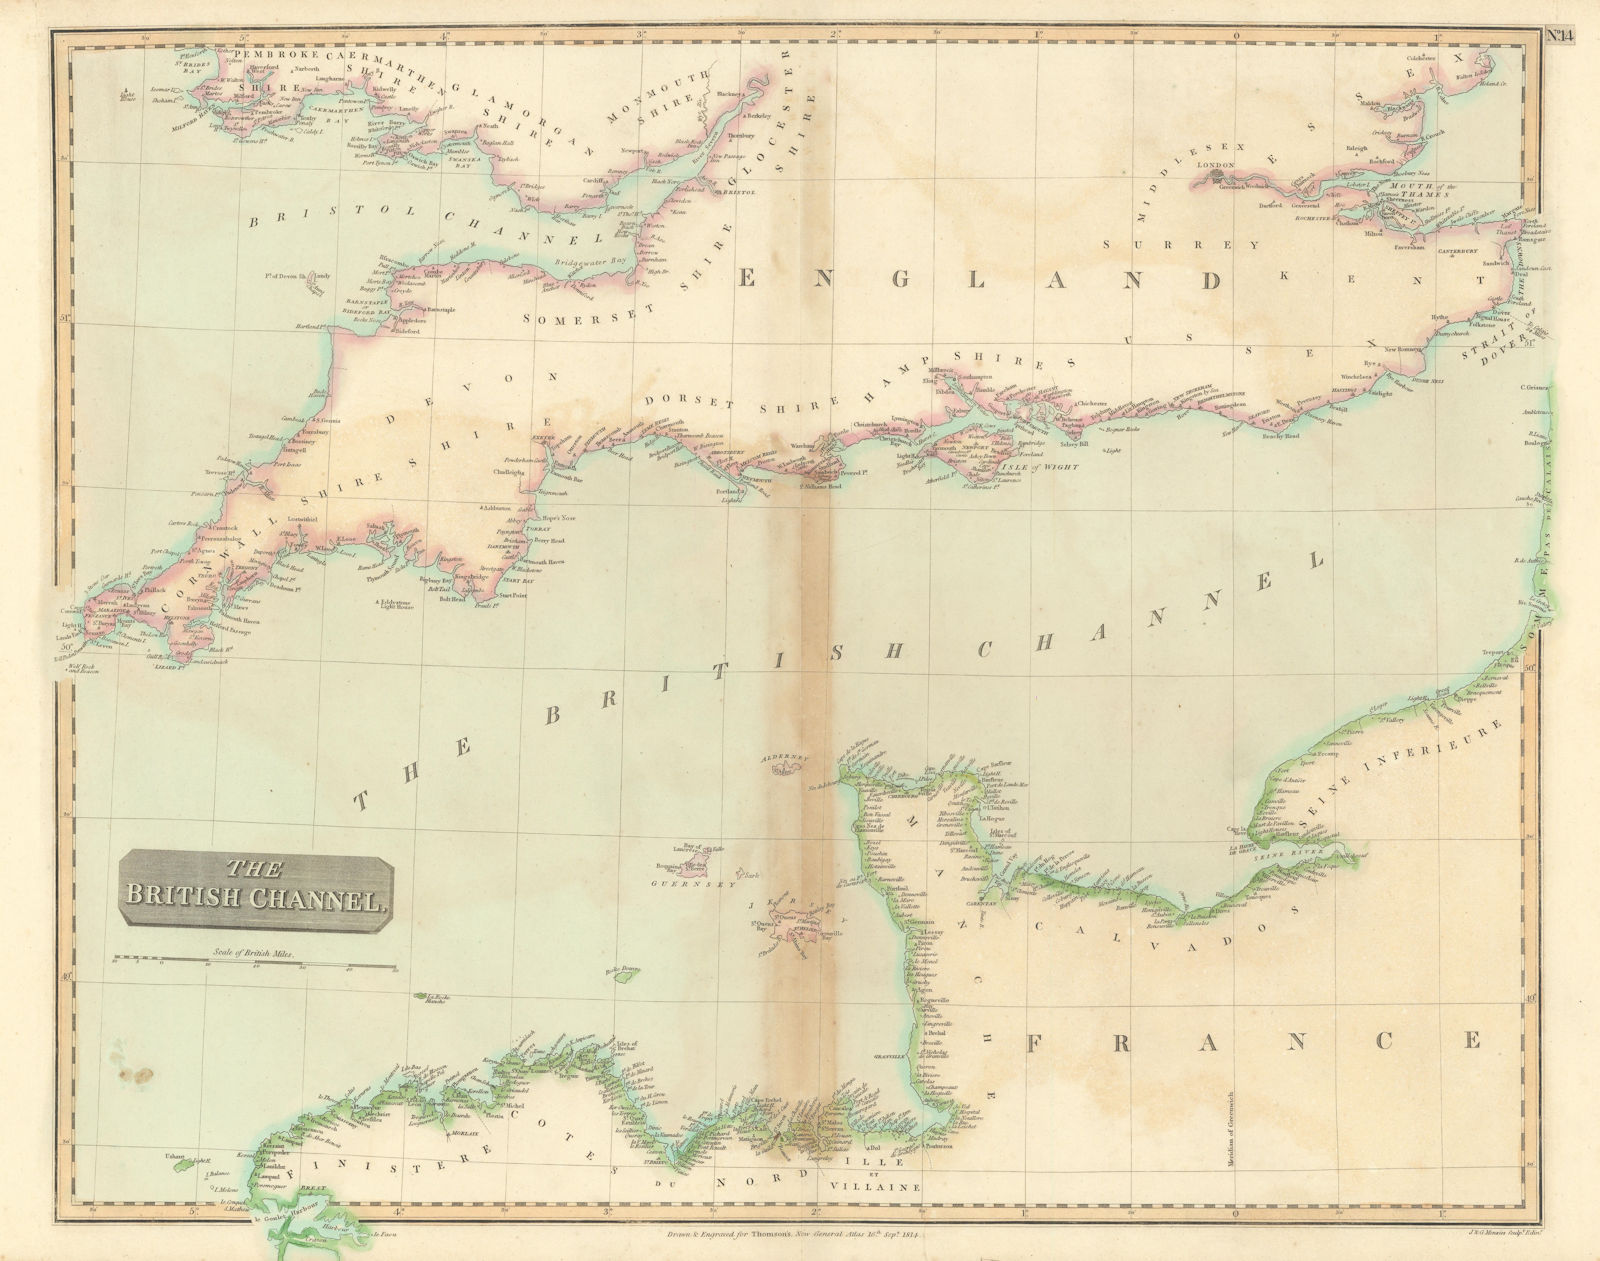 Associate Product "The British Channel" by John Thomson. English Channel. Manche 1817 old map